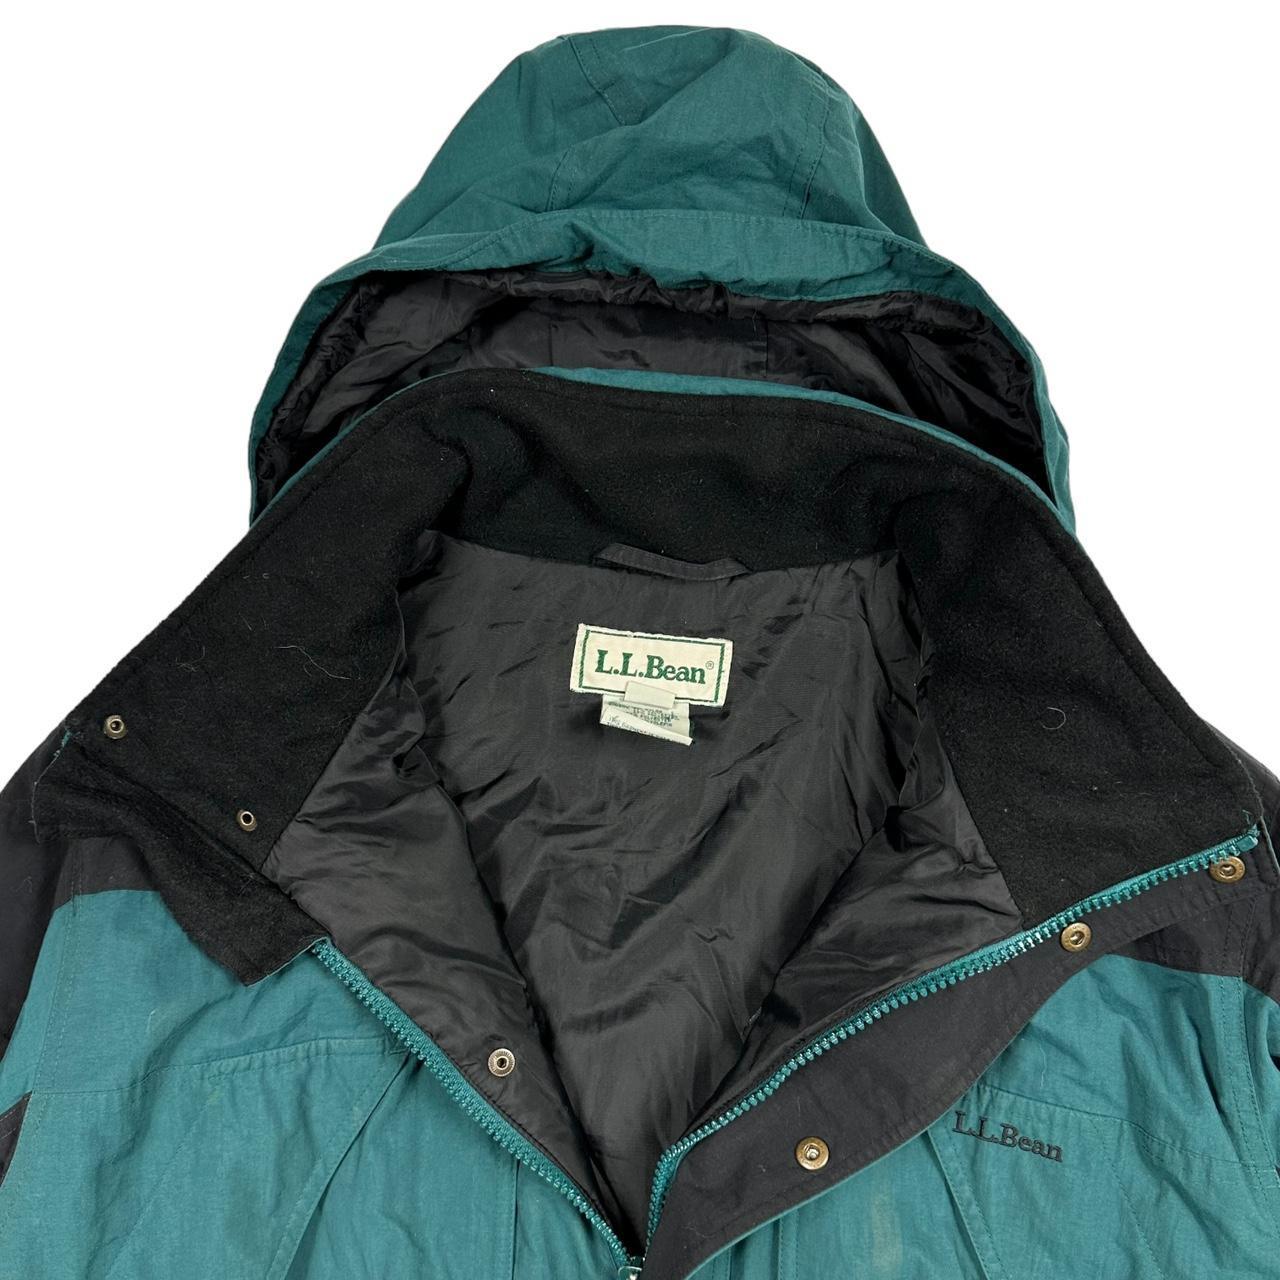 2000s L.L. Bean Green Outdoors Hooded Jacket - Known Source